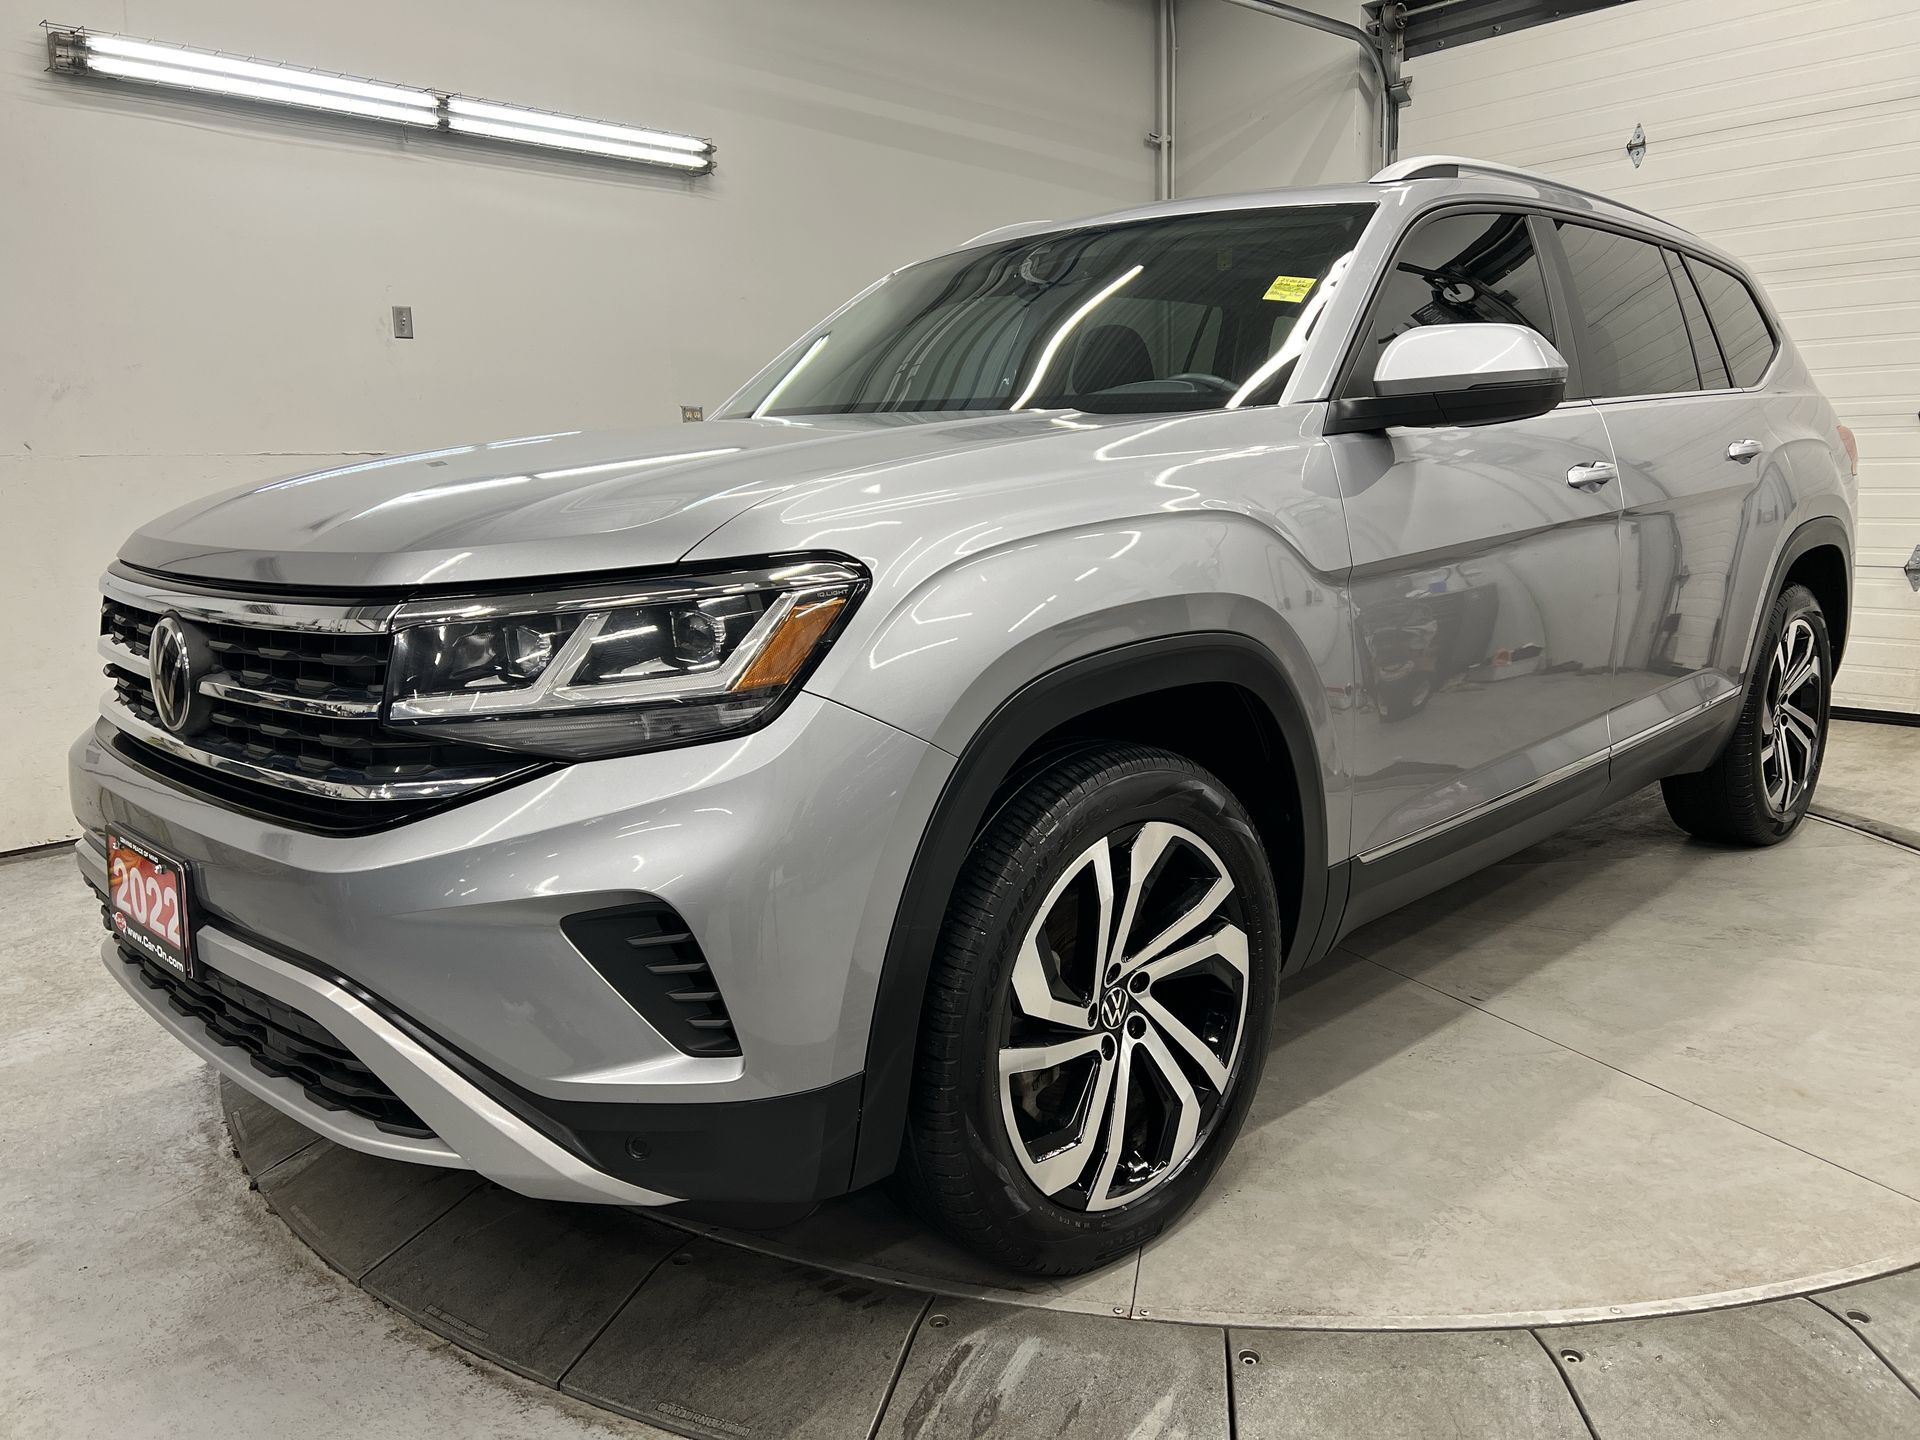 2022 Volkswagen Atlas HIGHLINE AWD| 3.6L V6 | 7-PASS |PANO ROOF |LEATHER